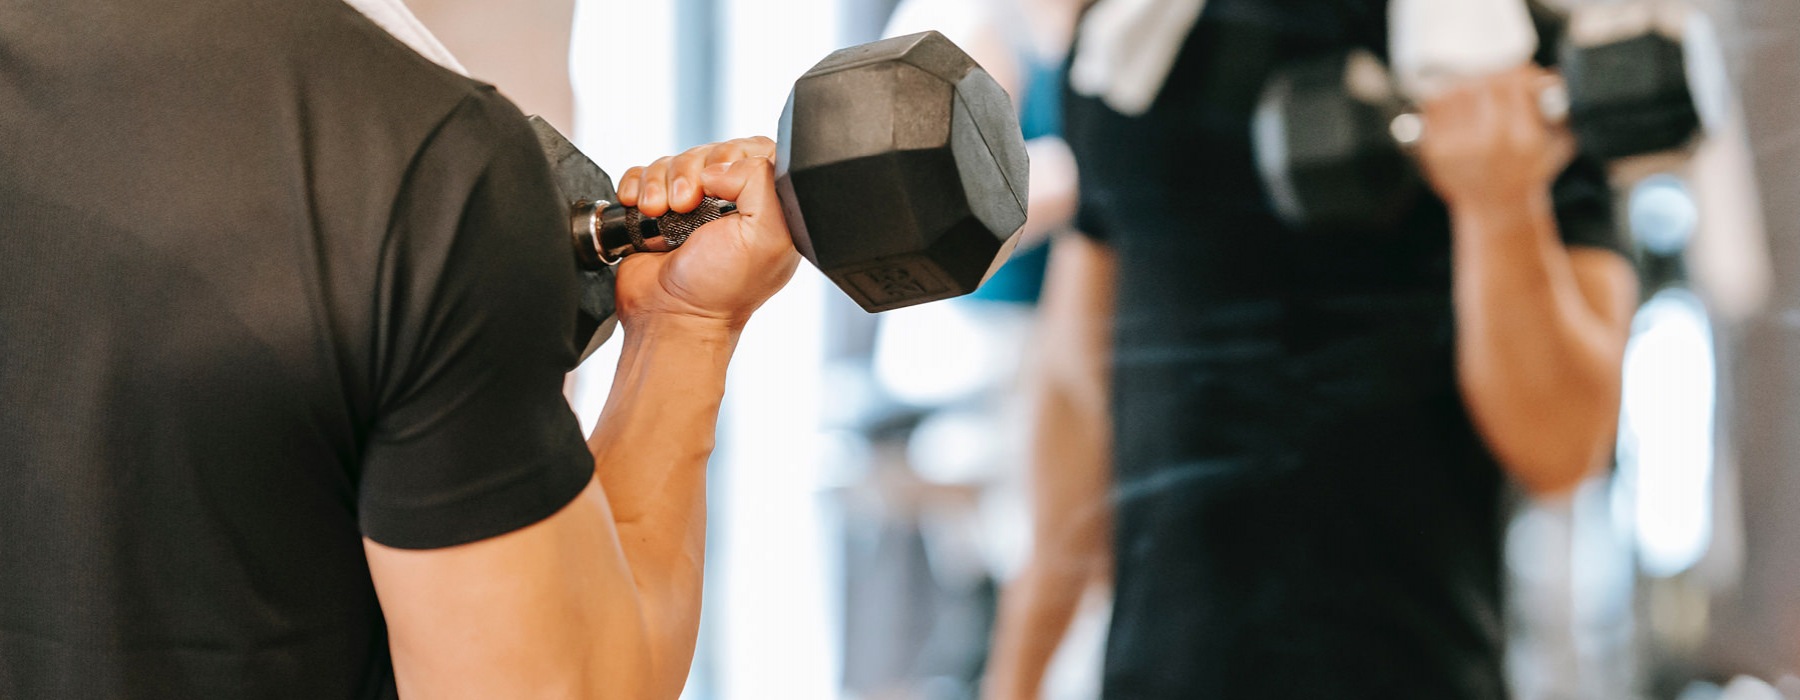 man exercises with dumbell in front of mirror